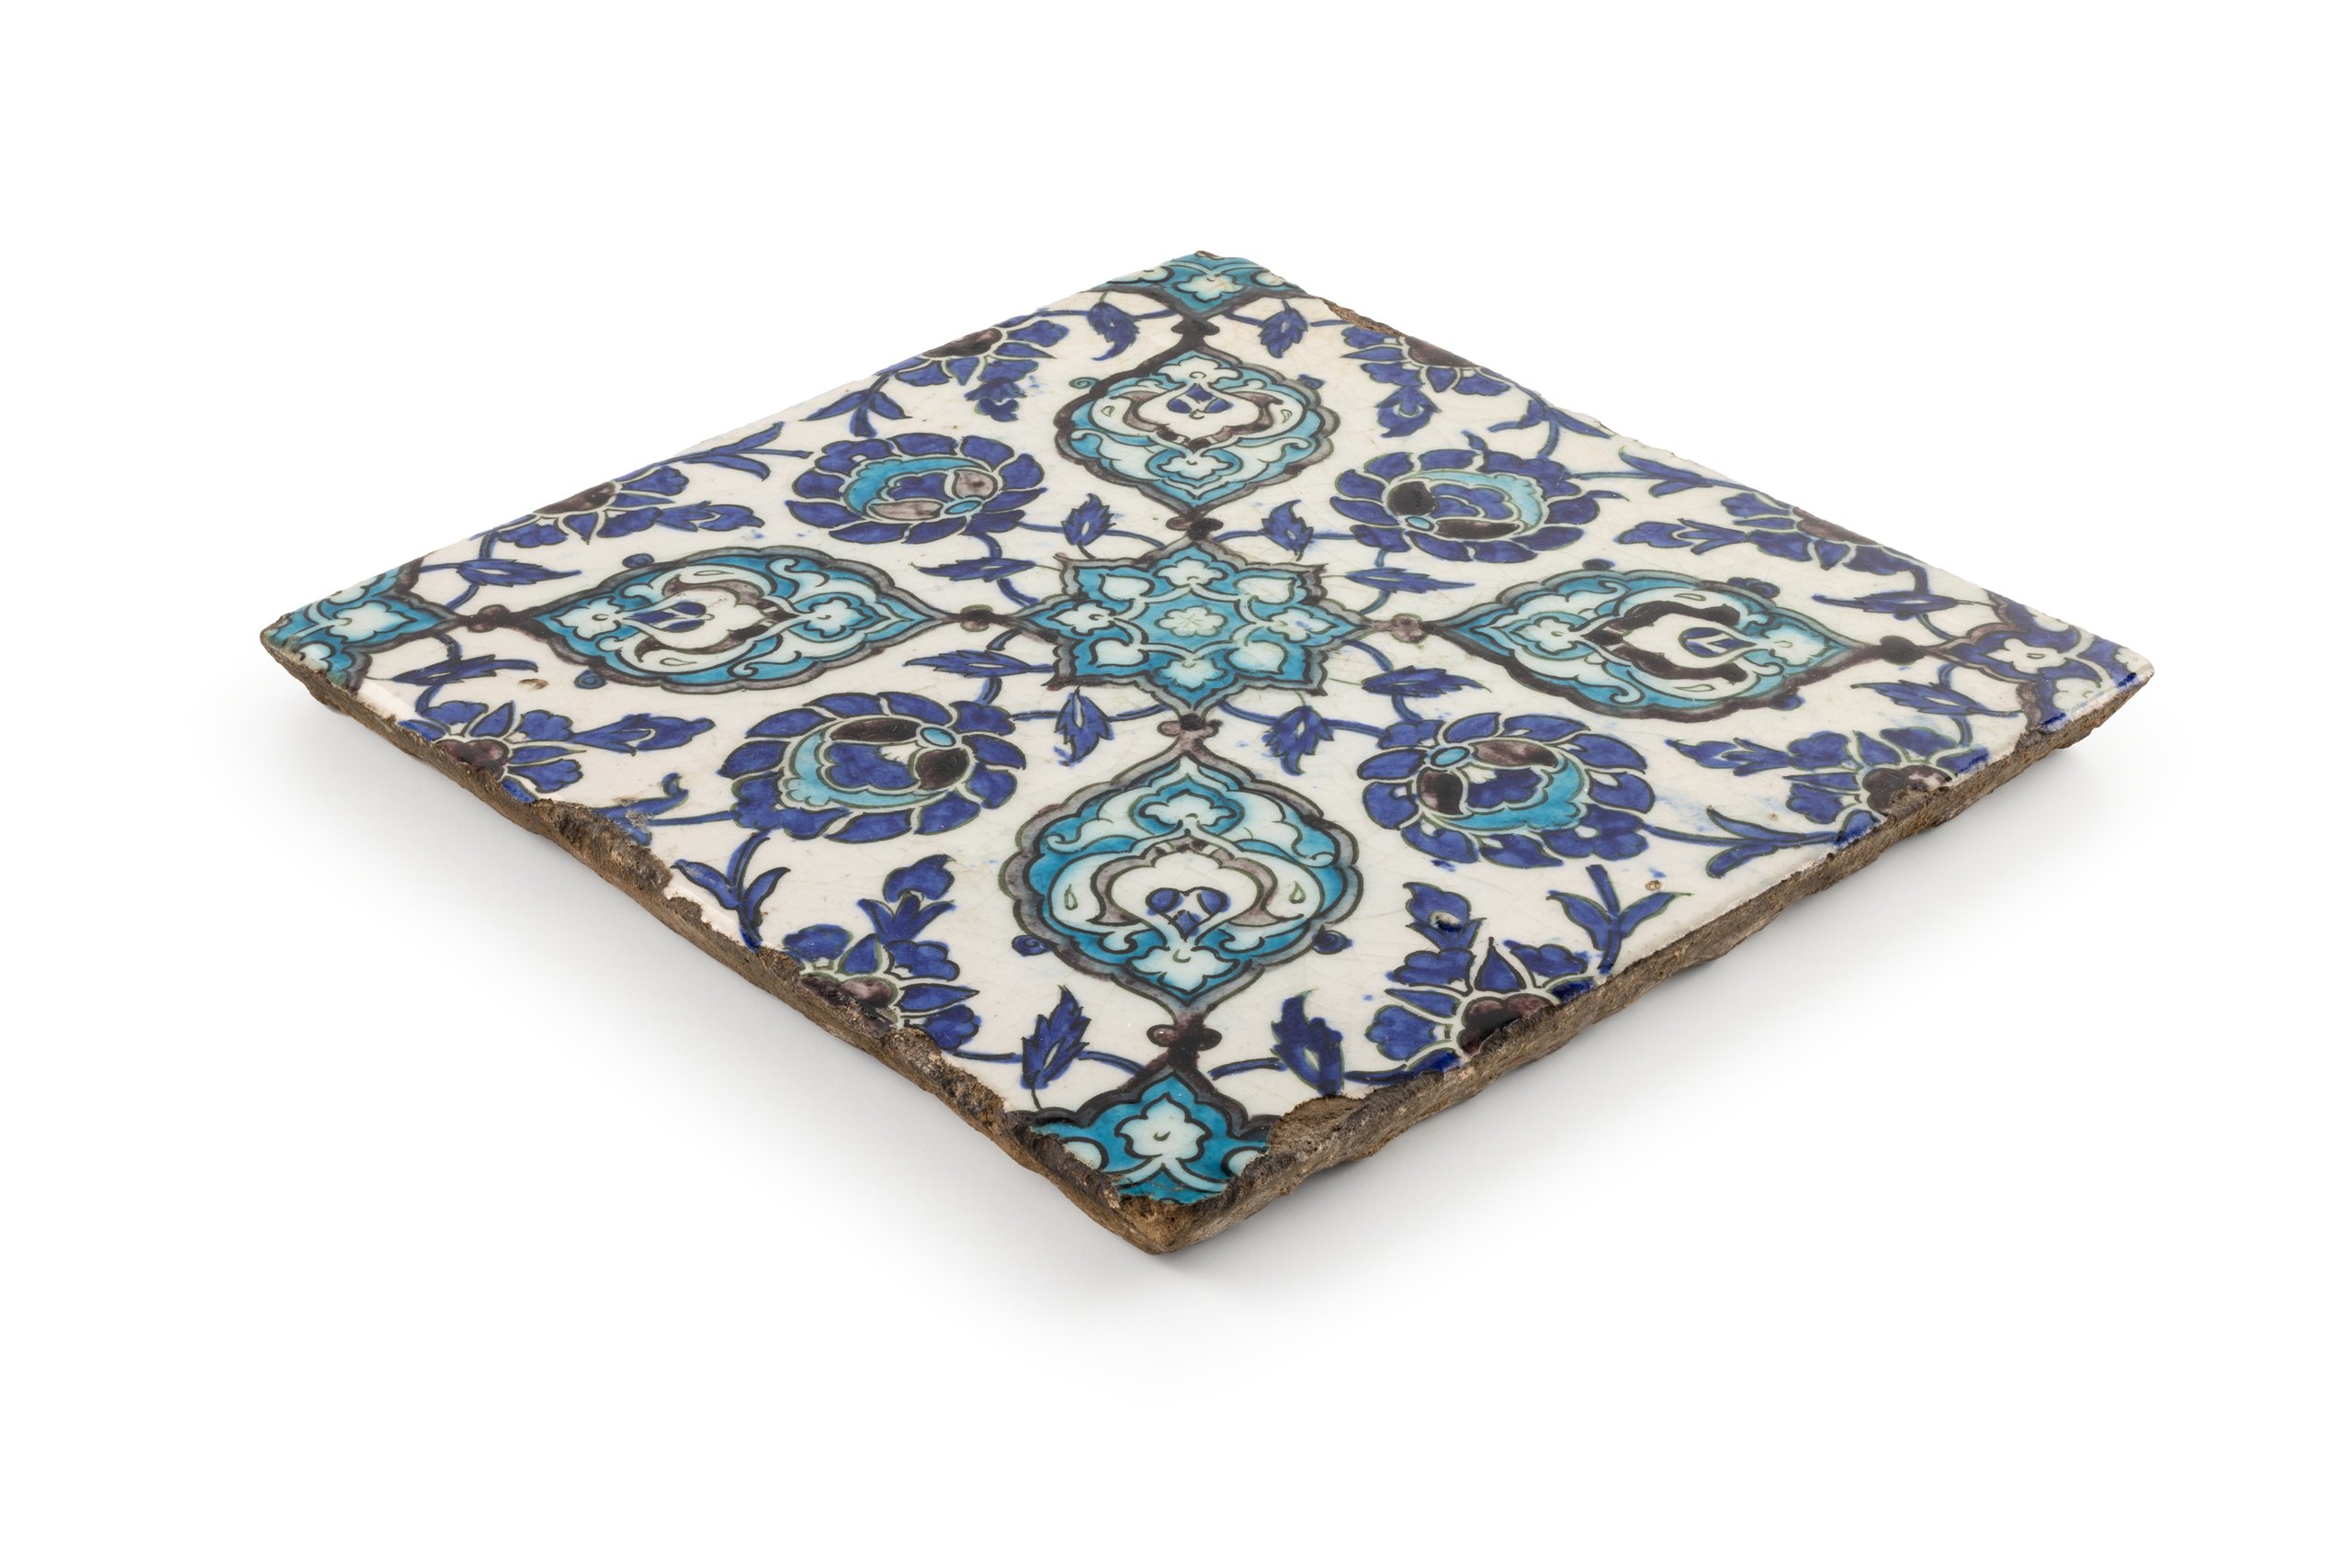 An earthenware tile from Damascus, Syria